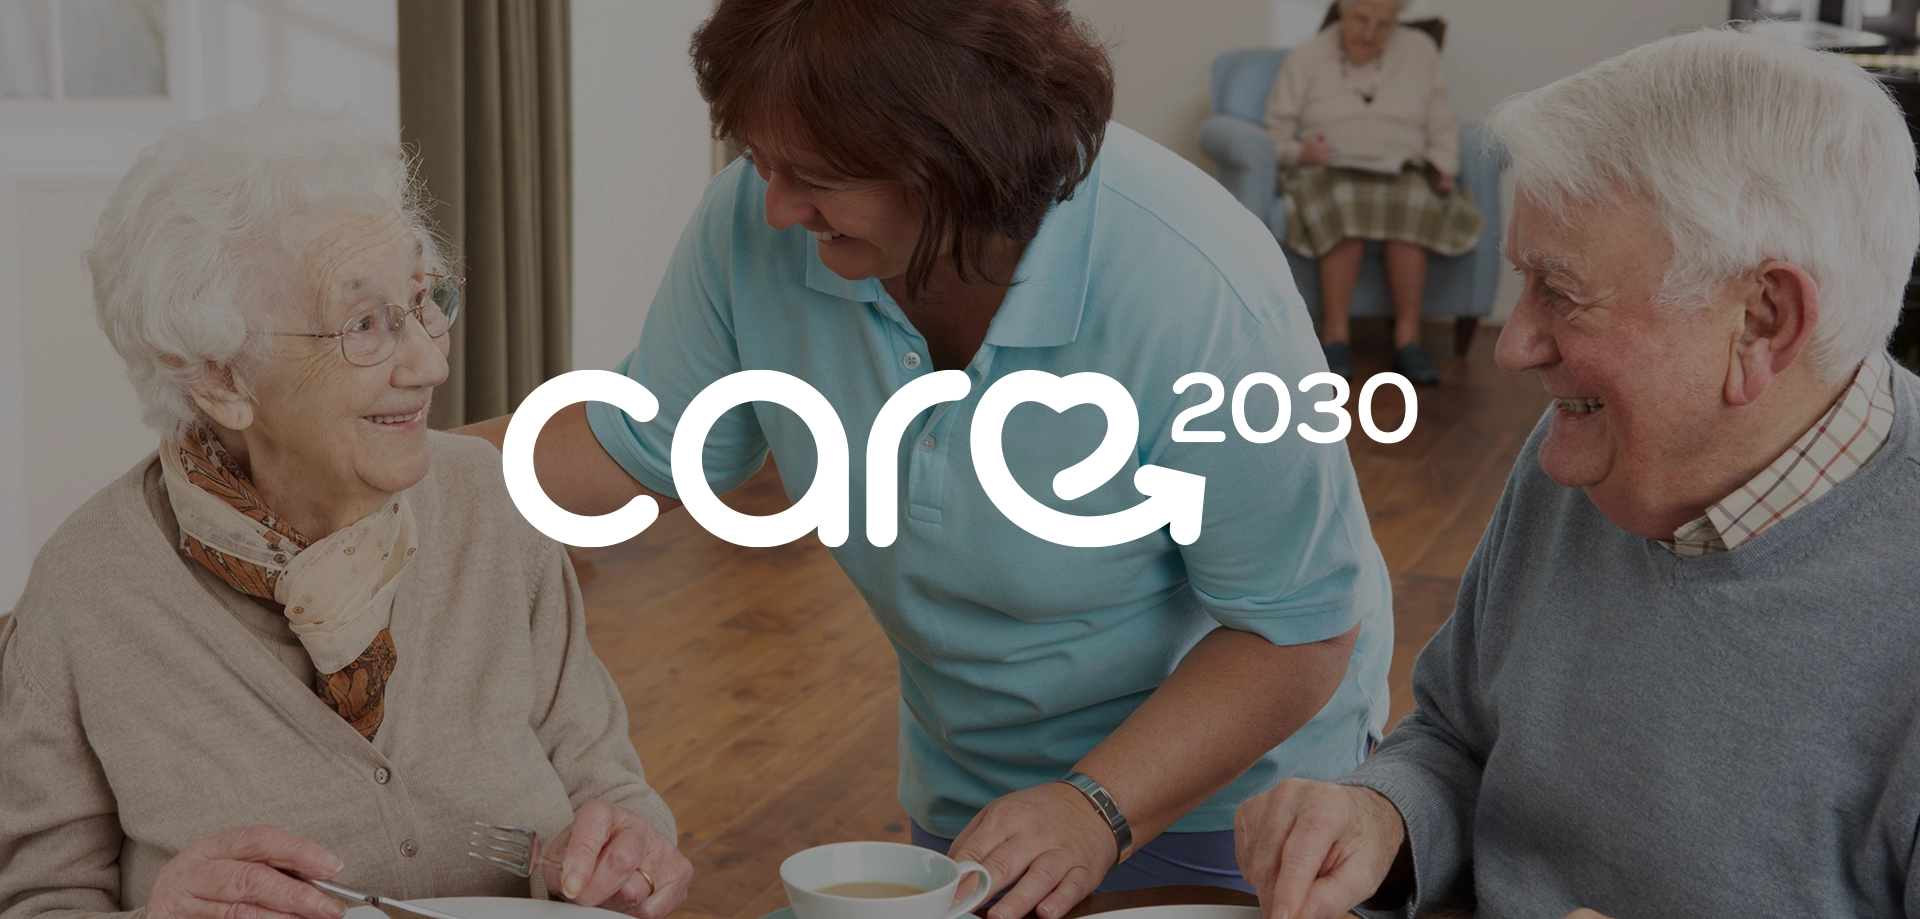 NW ADASS - Care 2030